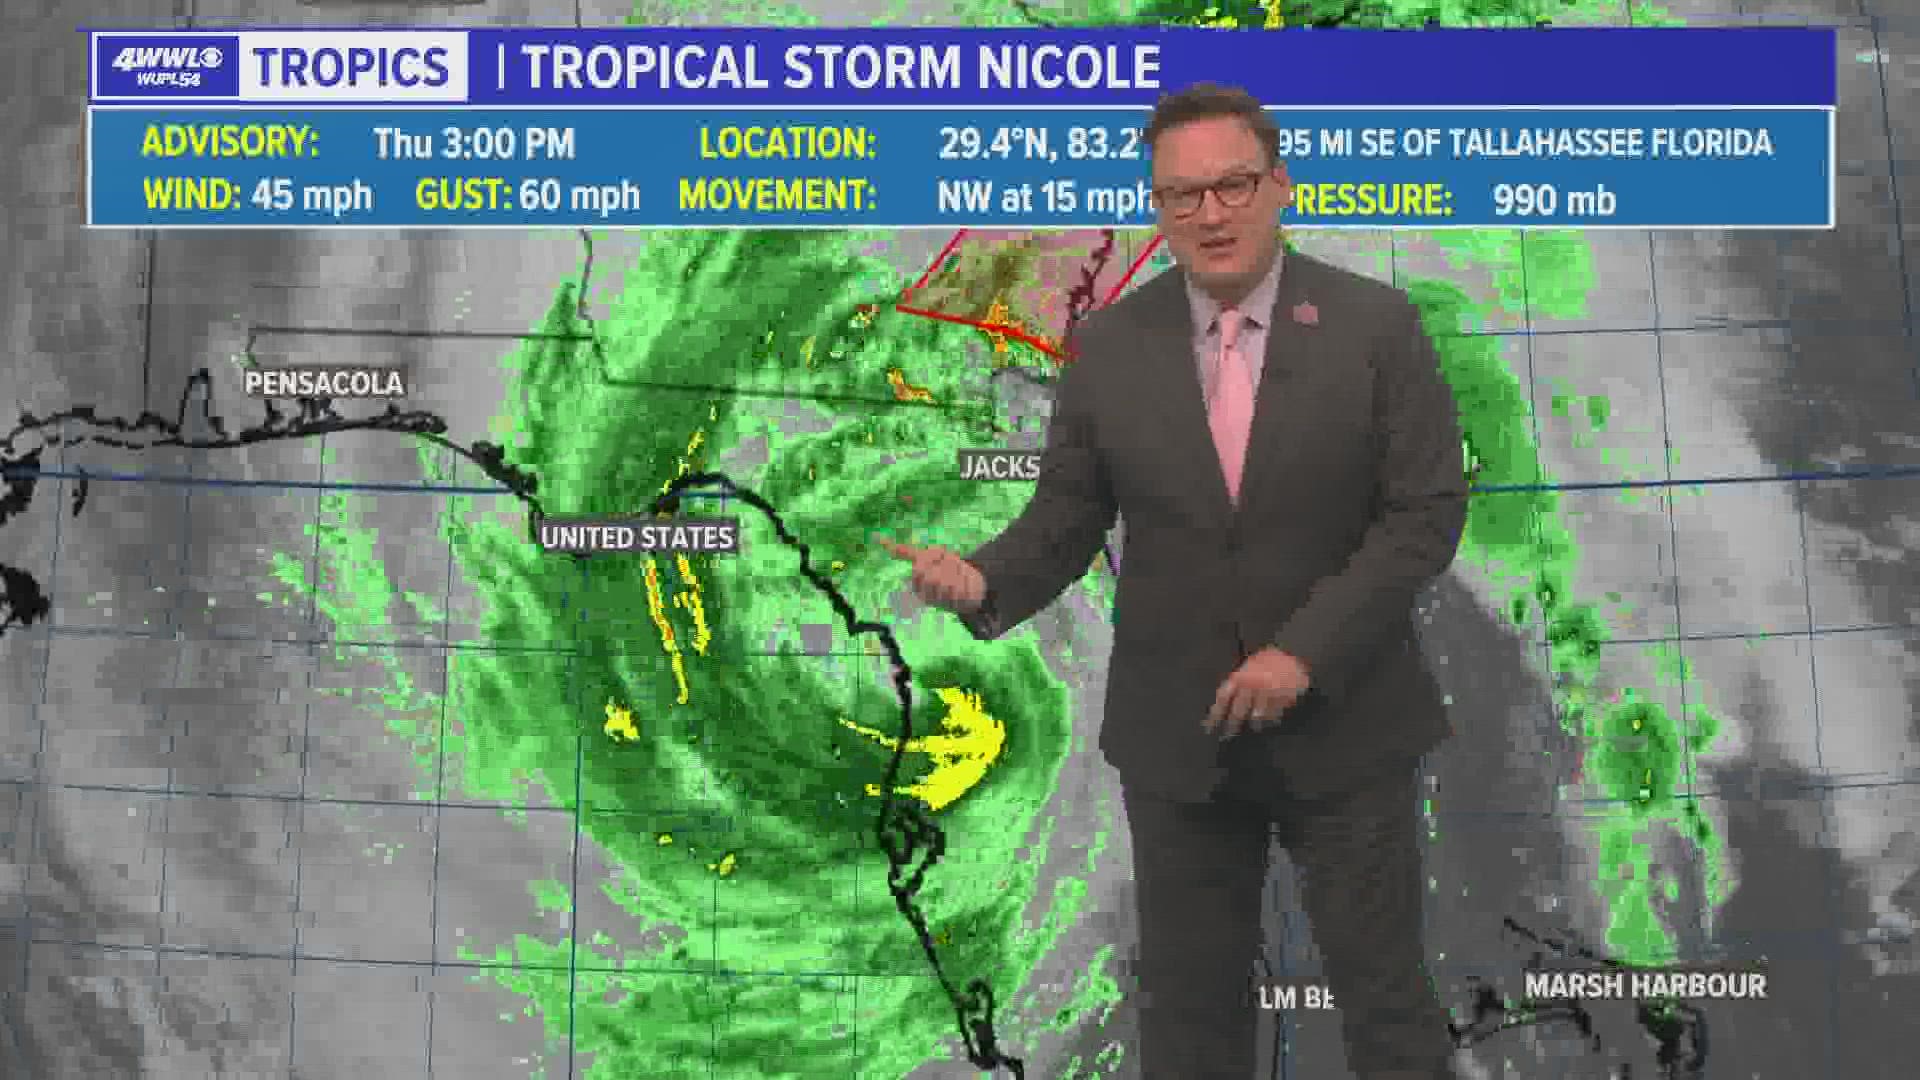 Chief Meteorologist Chris Franklin says even as Nicole weakens, it continues to wreak havoc over parts of the southeast.